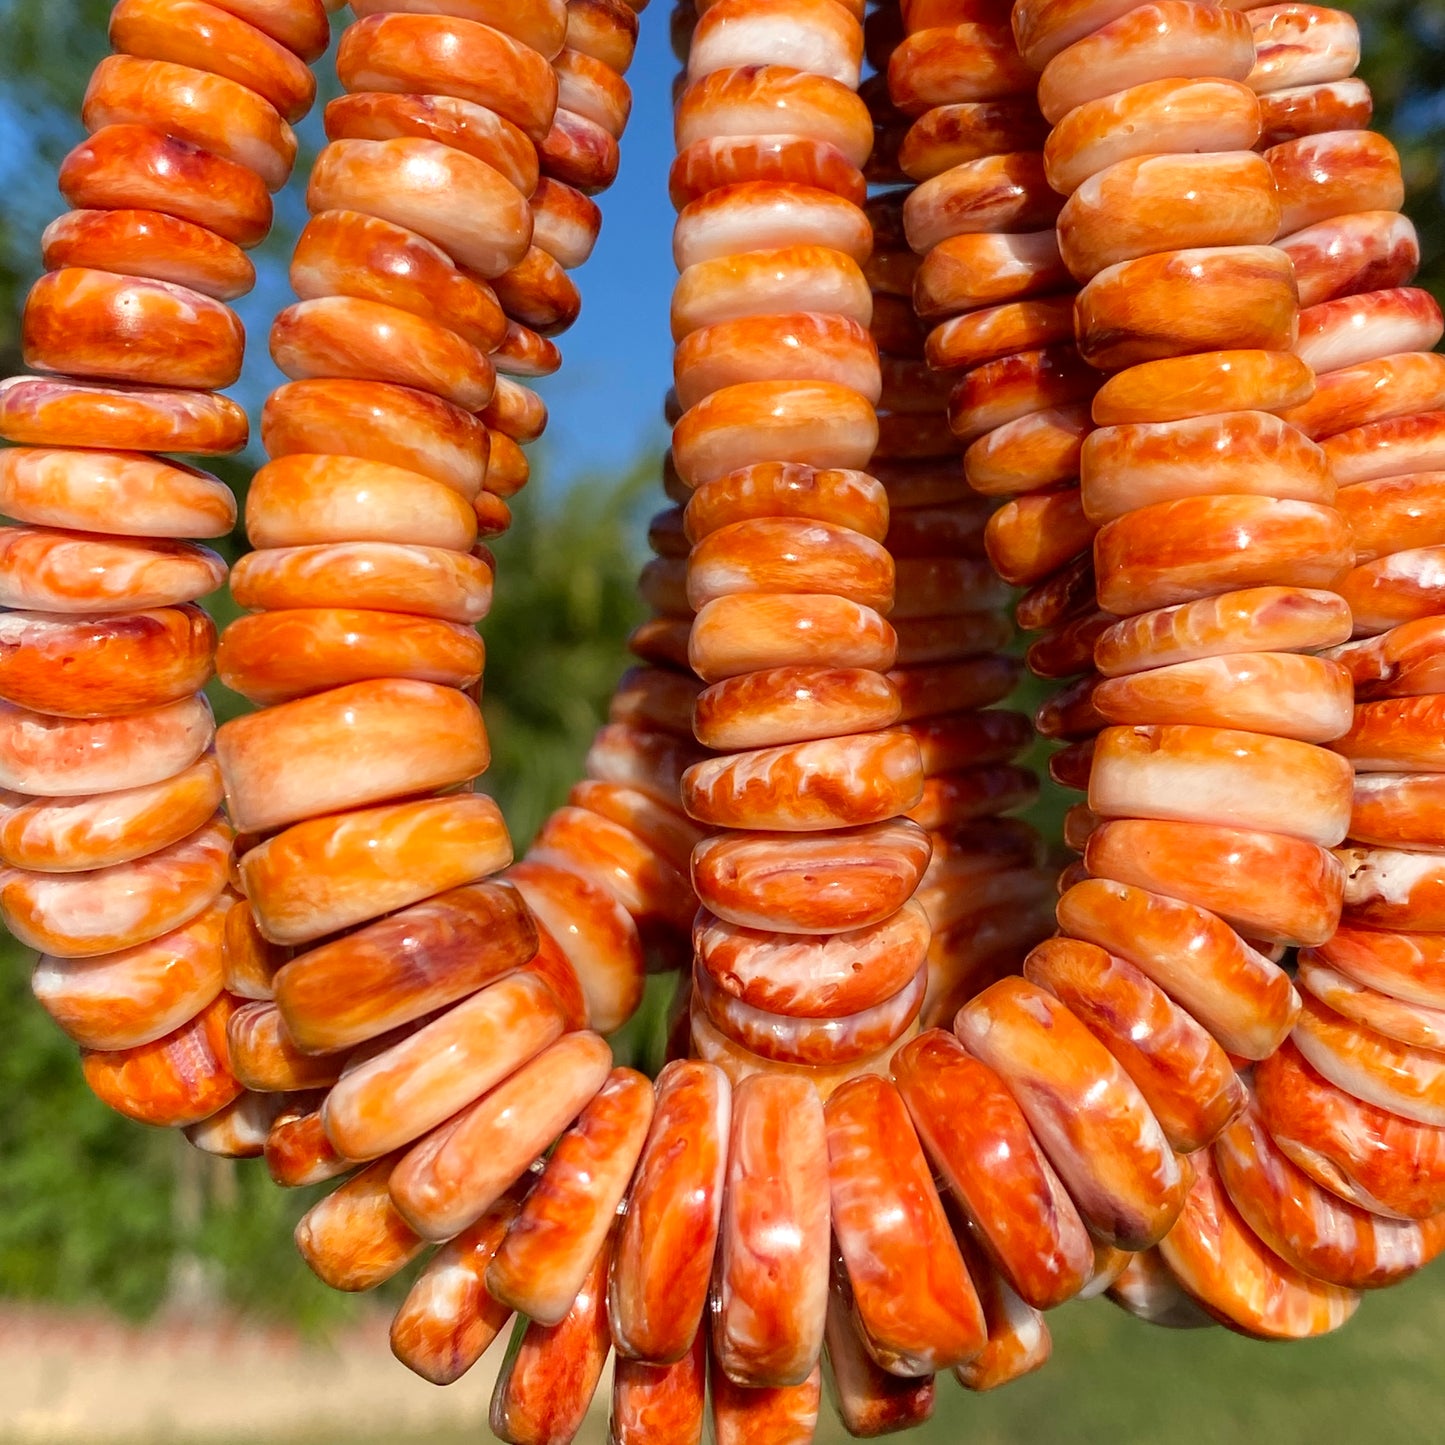 Gigantic Mexican Sunset-Orange Spiny Oyster Shell Beads Graduated Rondelle Heishi For DIY Jewelry Making (Photo Doesn't Do It Justice)